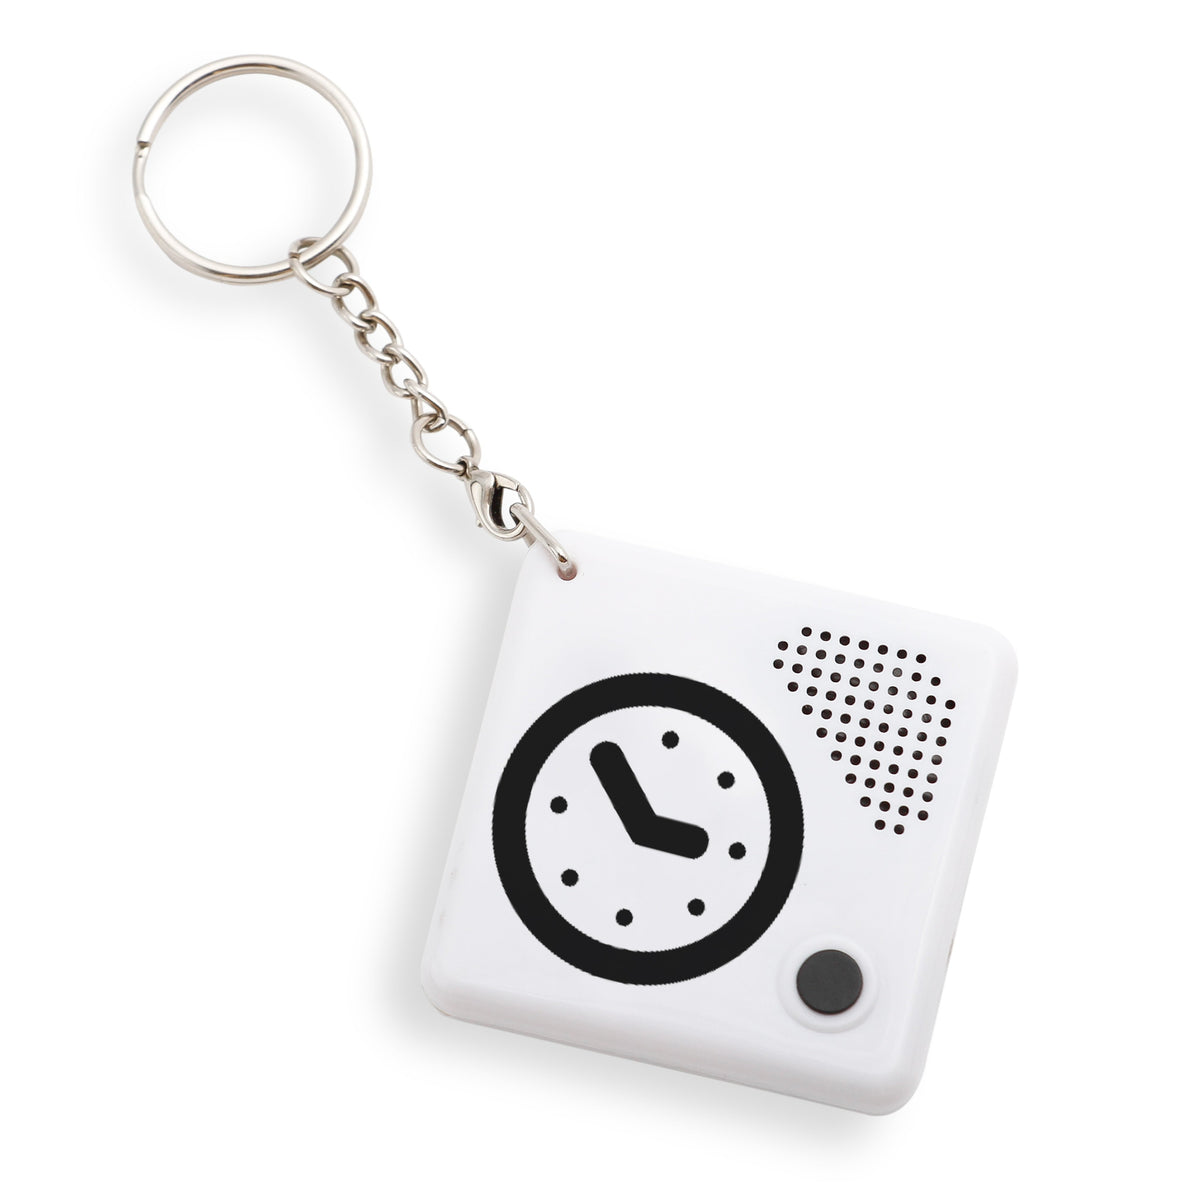 Keyring attached to a small white square device with a black clock printed on it and a small black button which can be pressed to tell the time from the small speaker in the device. Device can be removed from the keychain via a small lobster claw clasp.